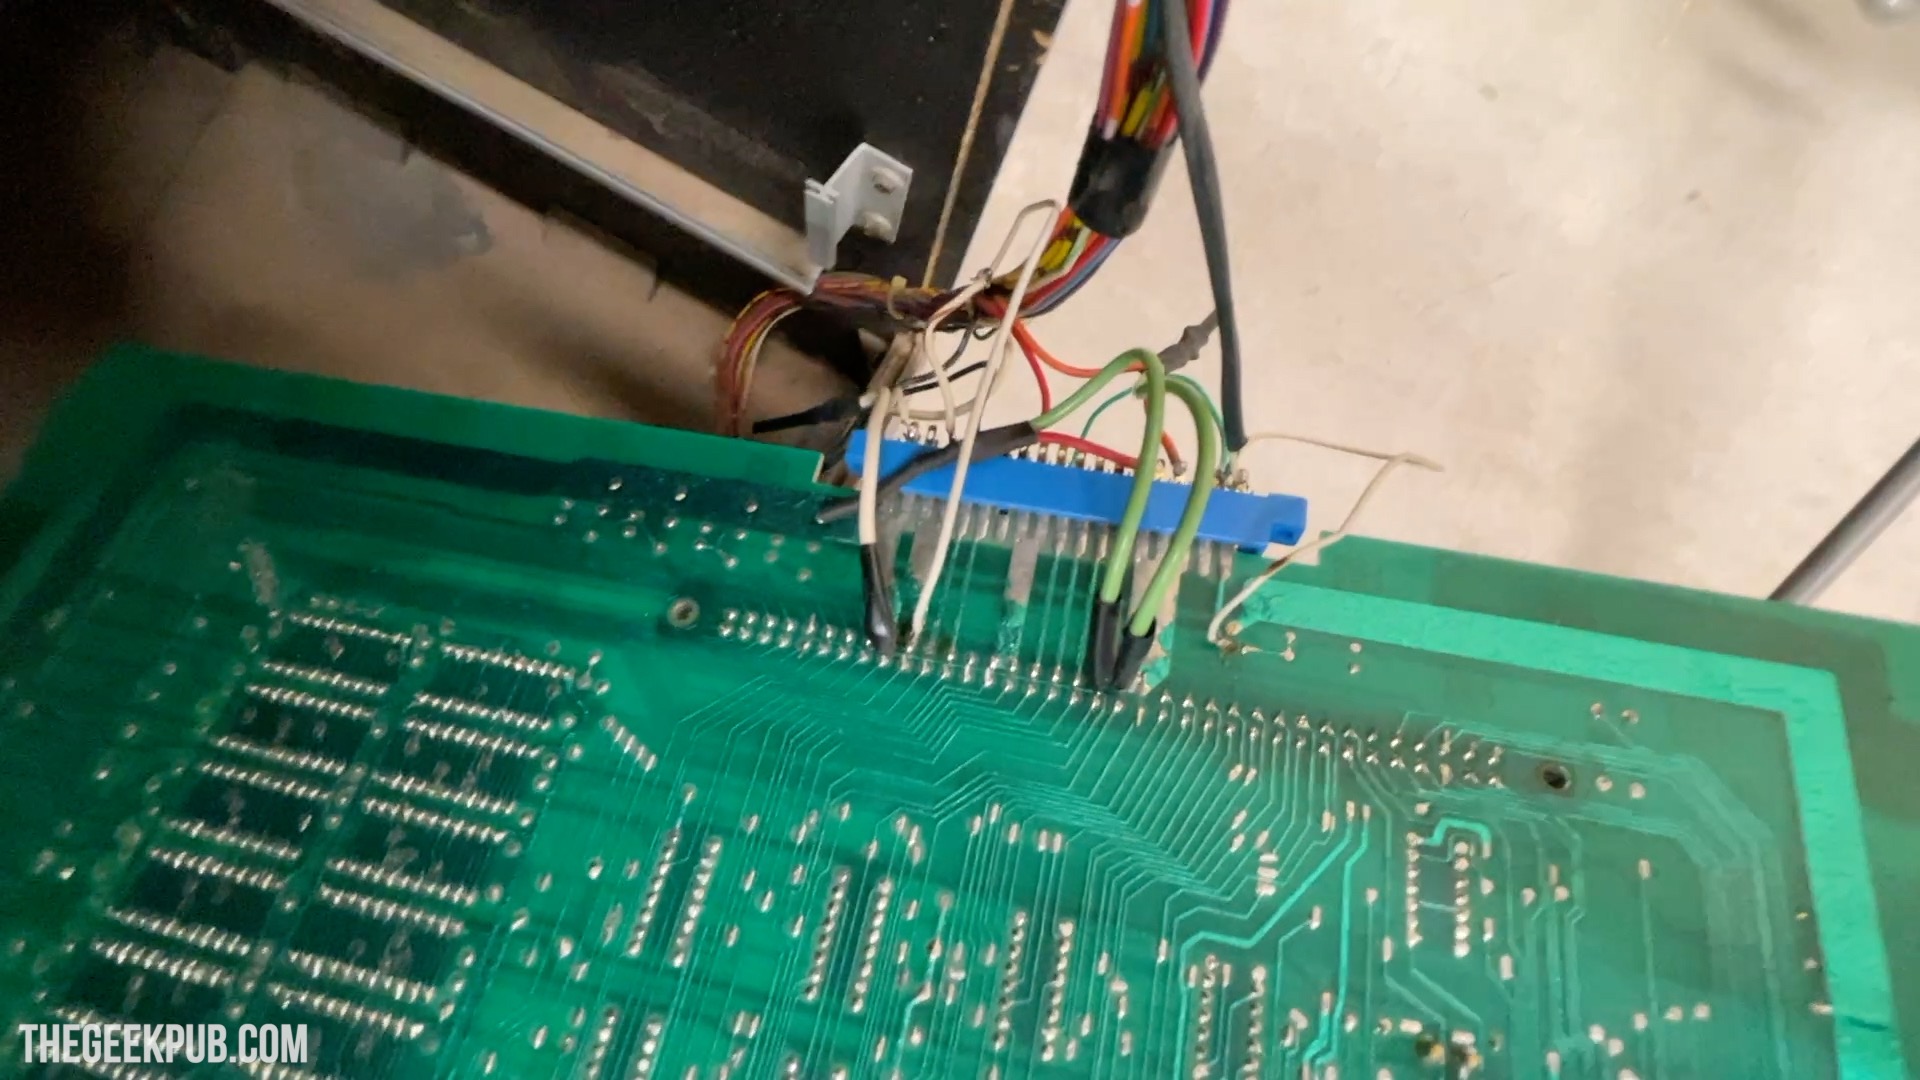 Space Invaders wiring harness disaster